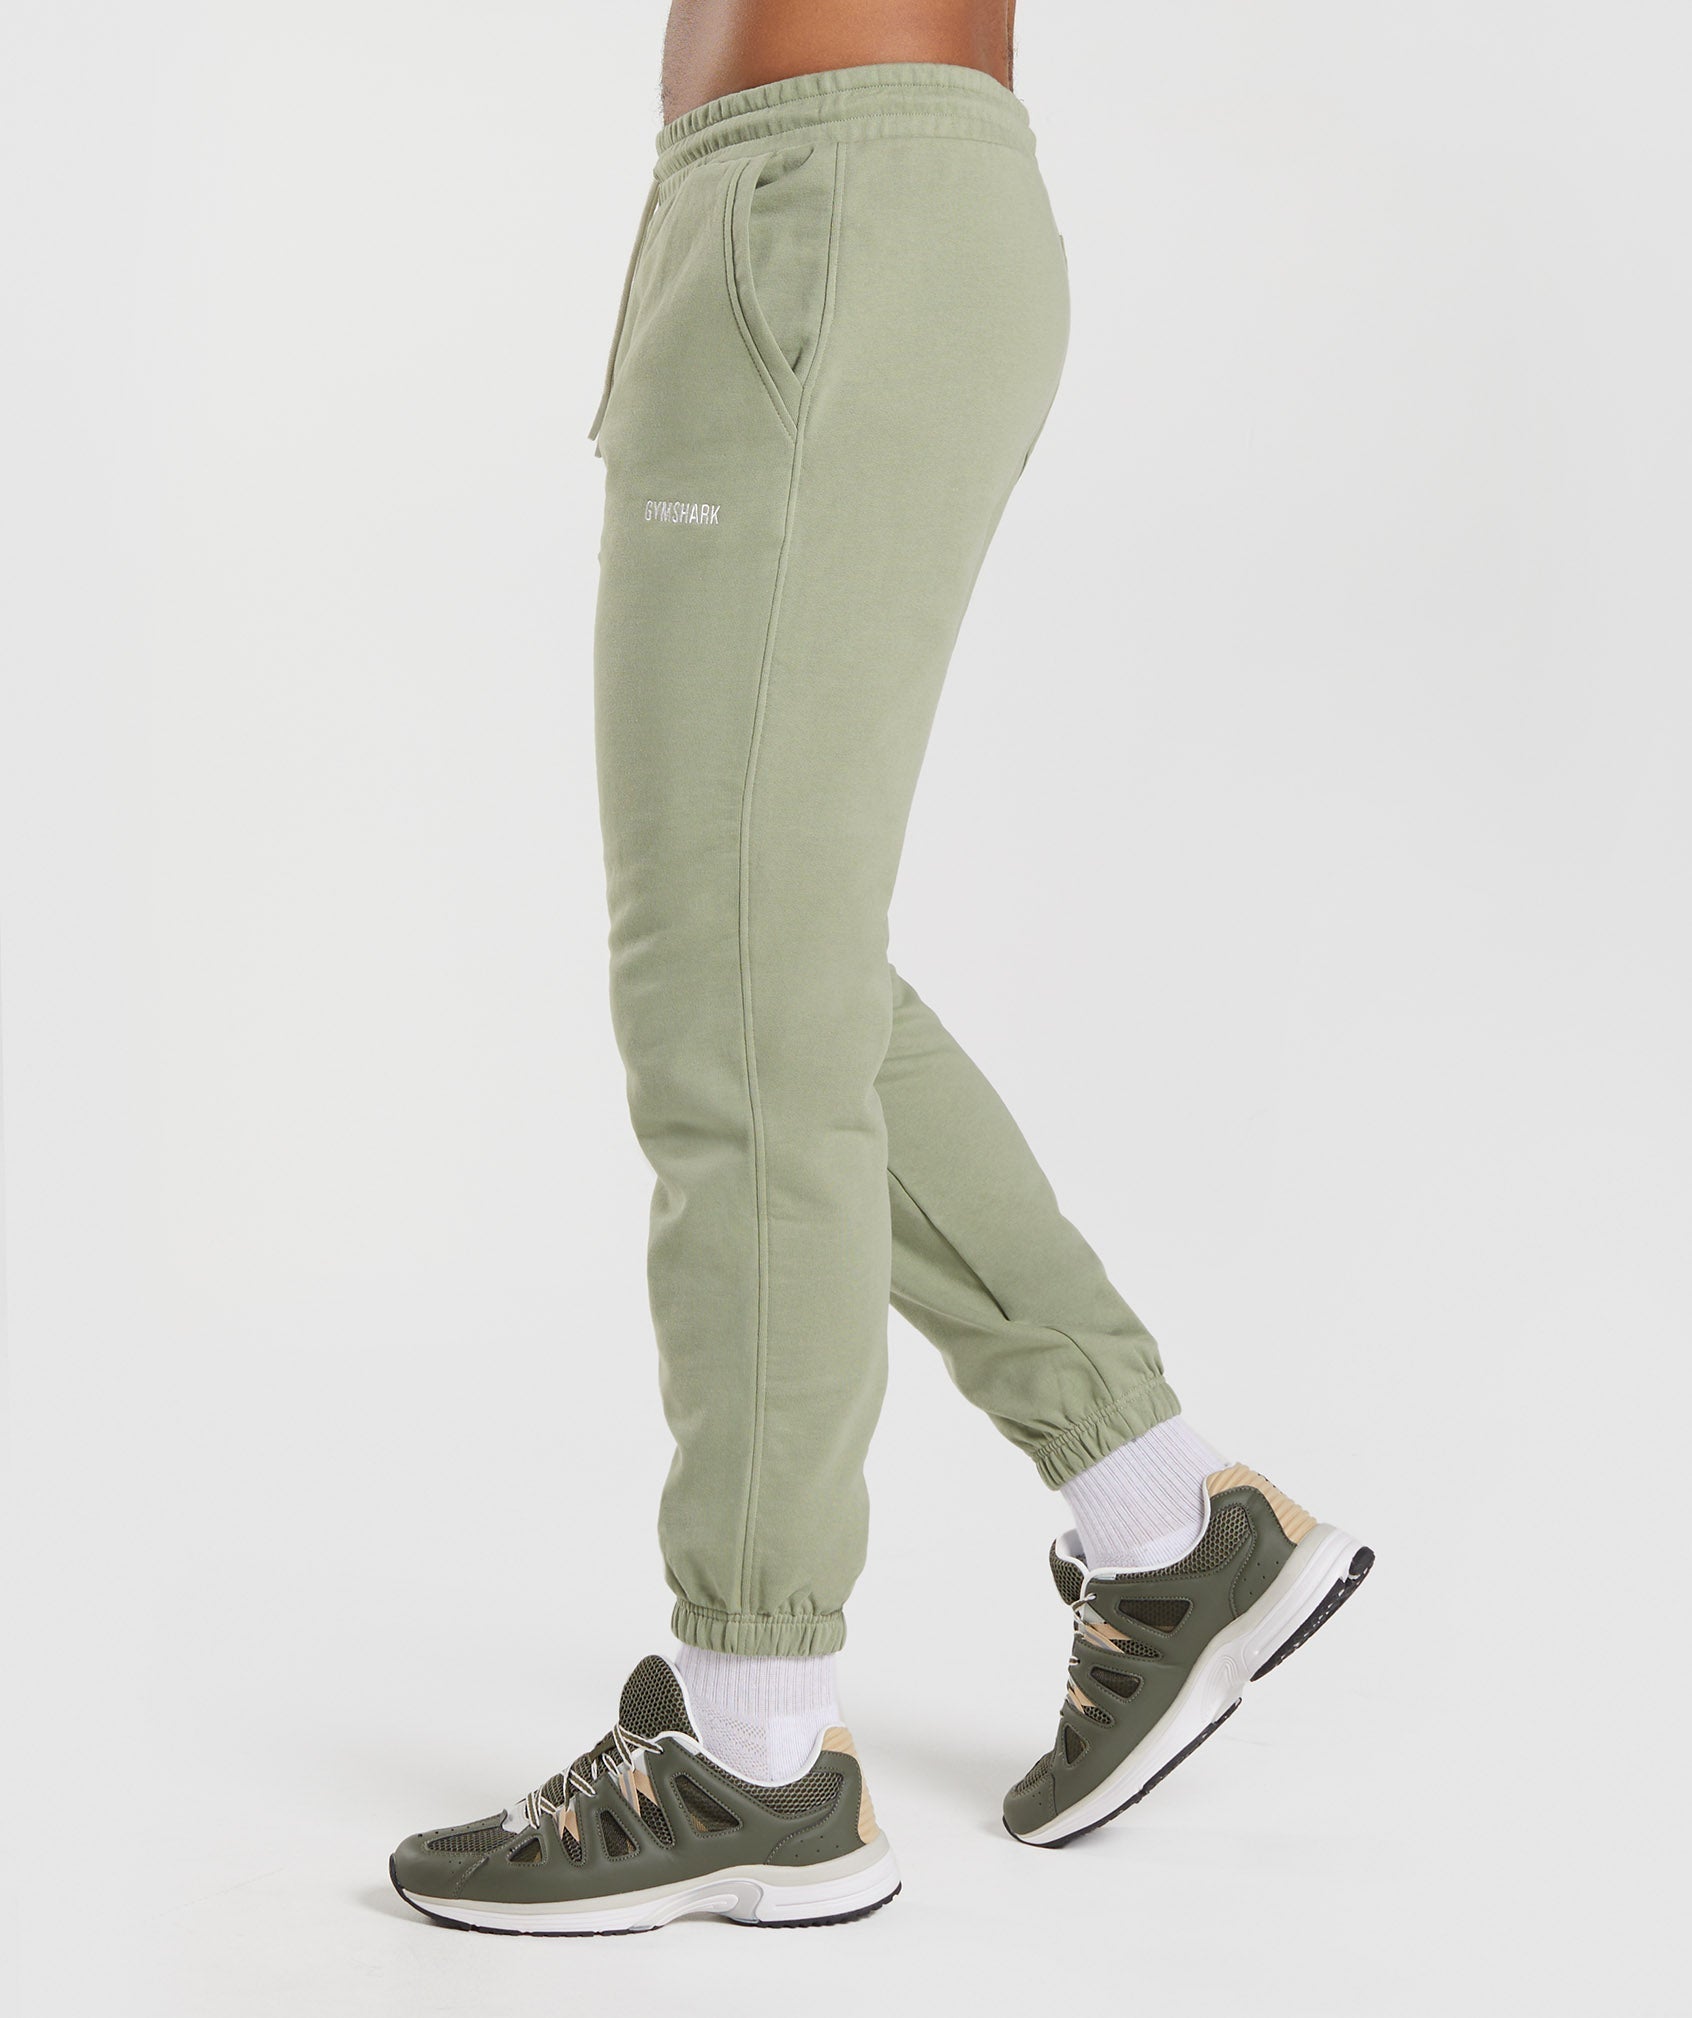 Gymshark Rest Day Sweats Joggers - Sage Green